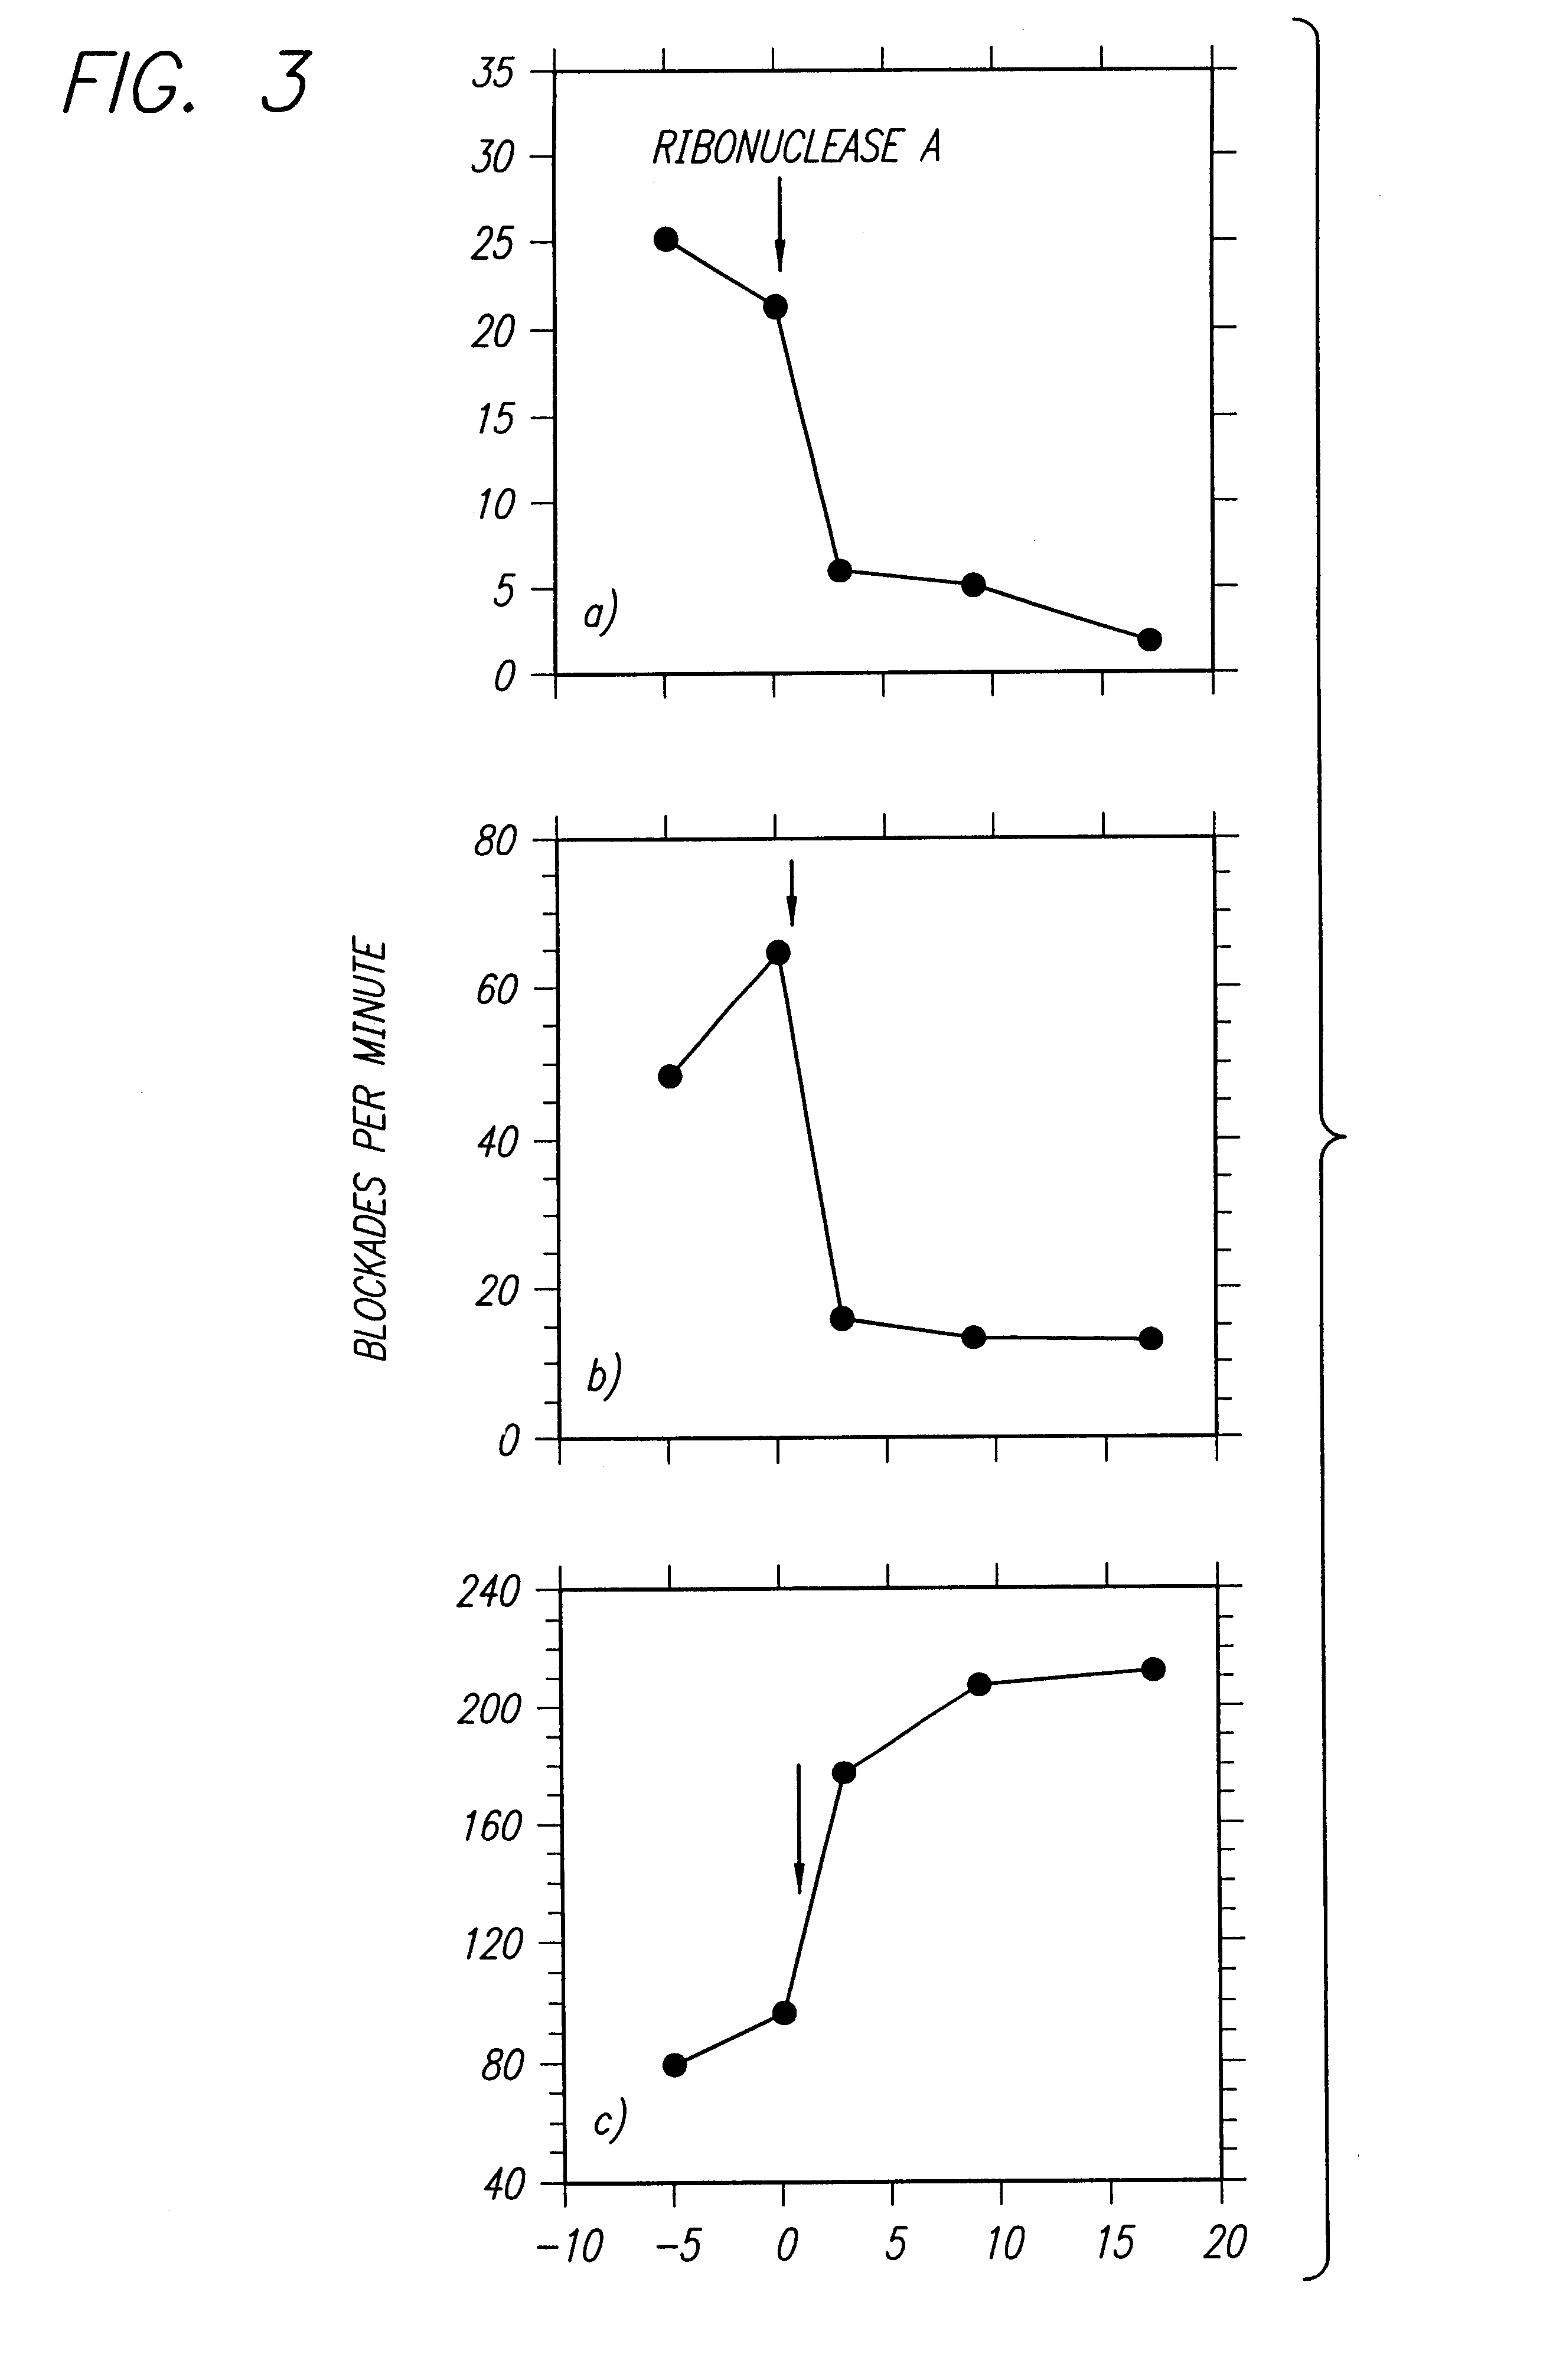 Miniature support for thin films containing single channels or nanopores and methods for using same